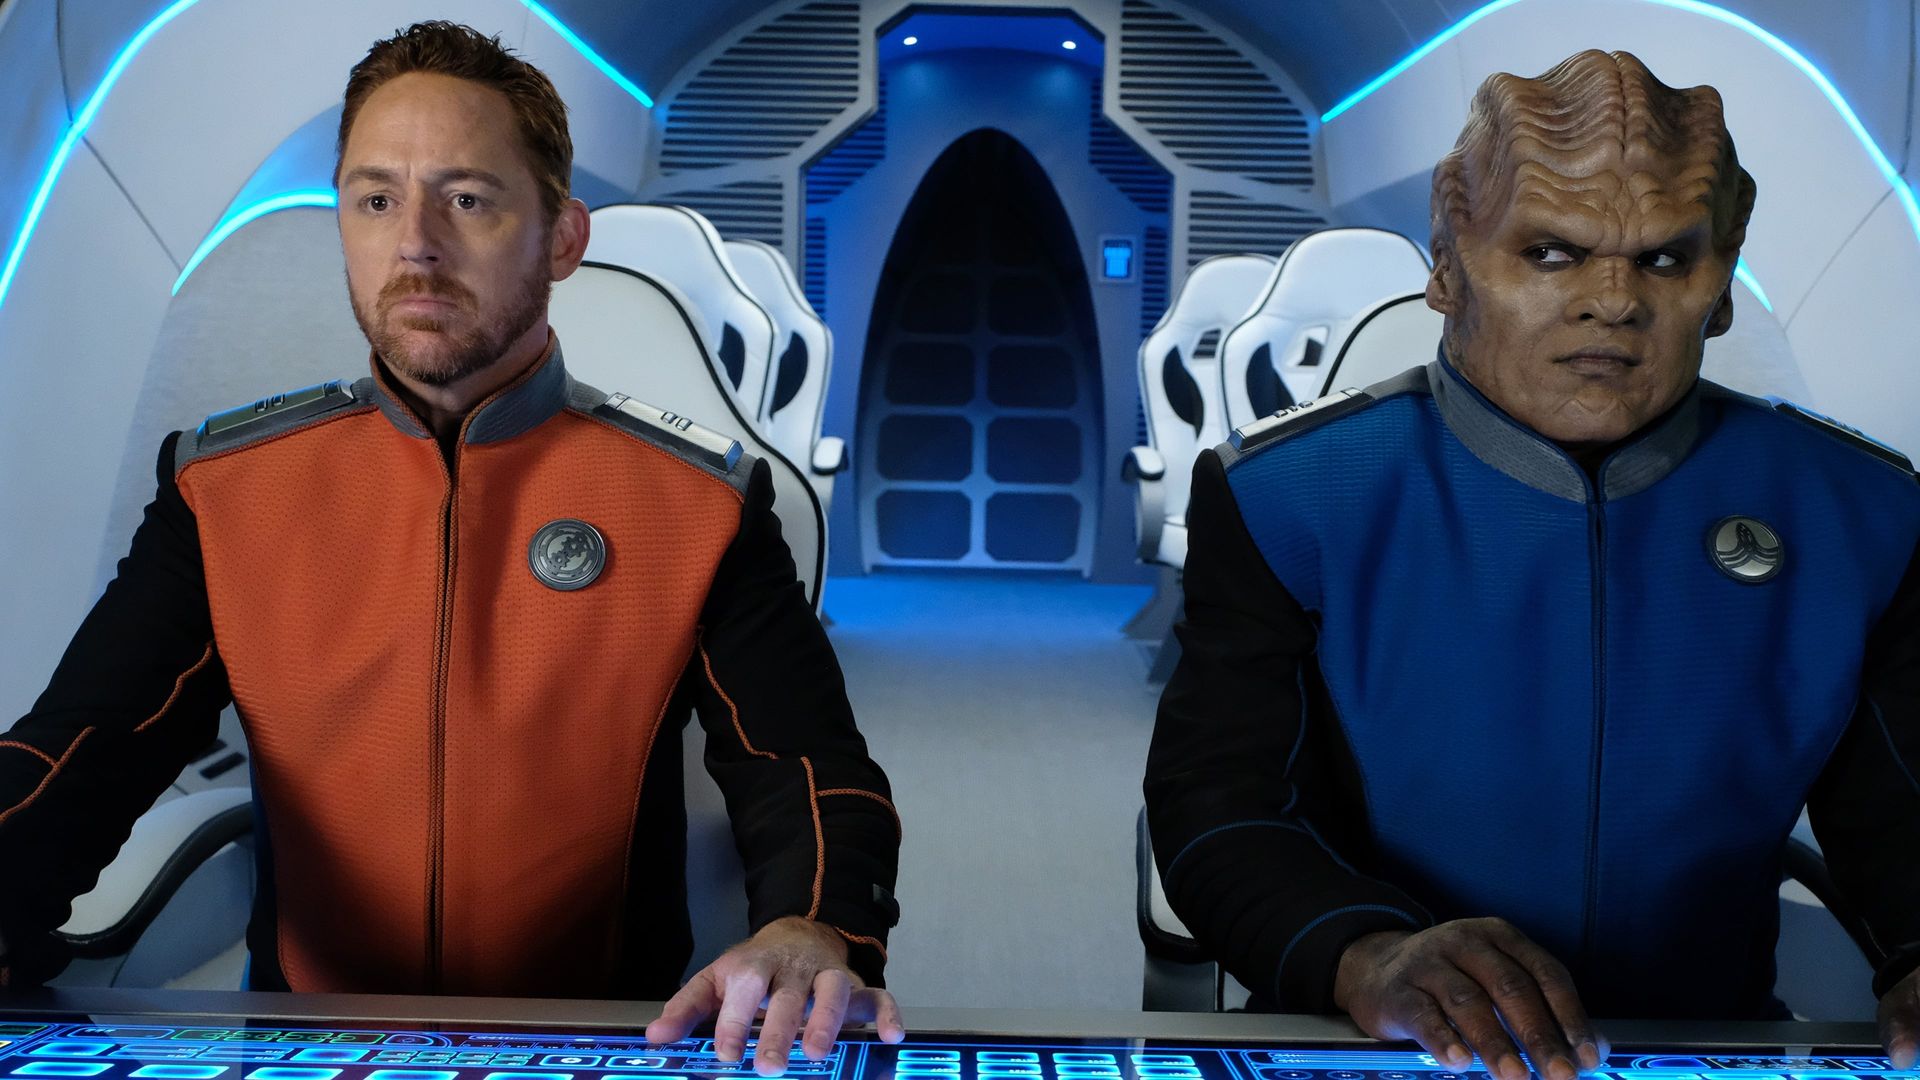 The Orville background